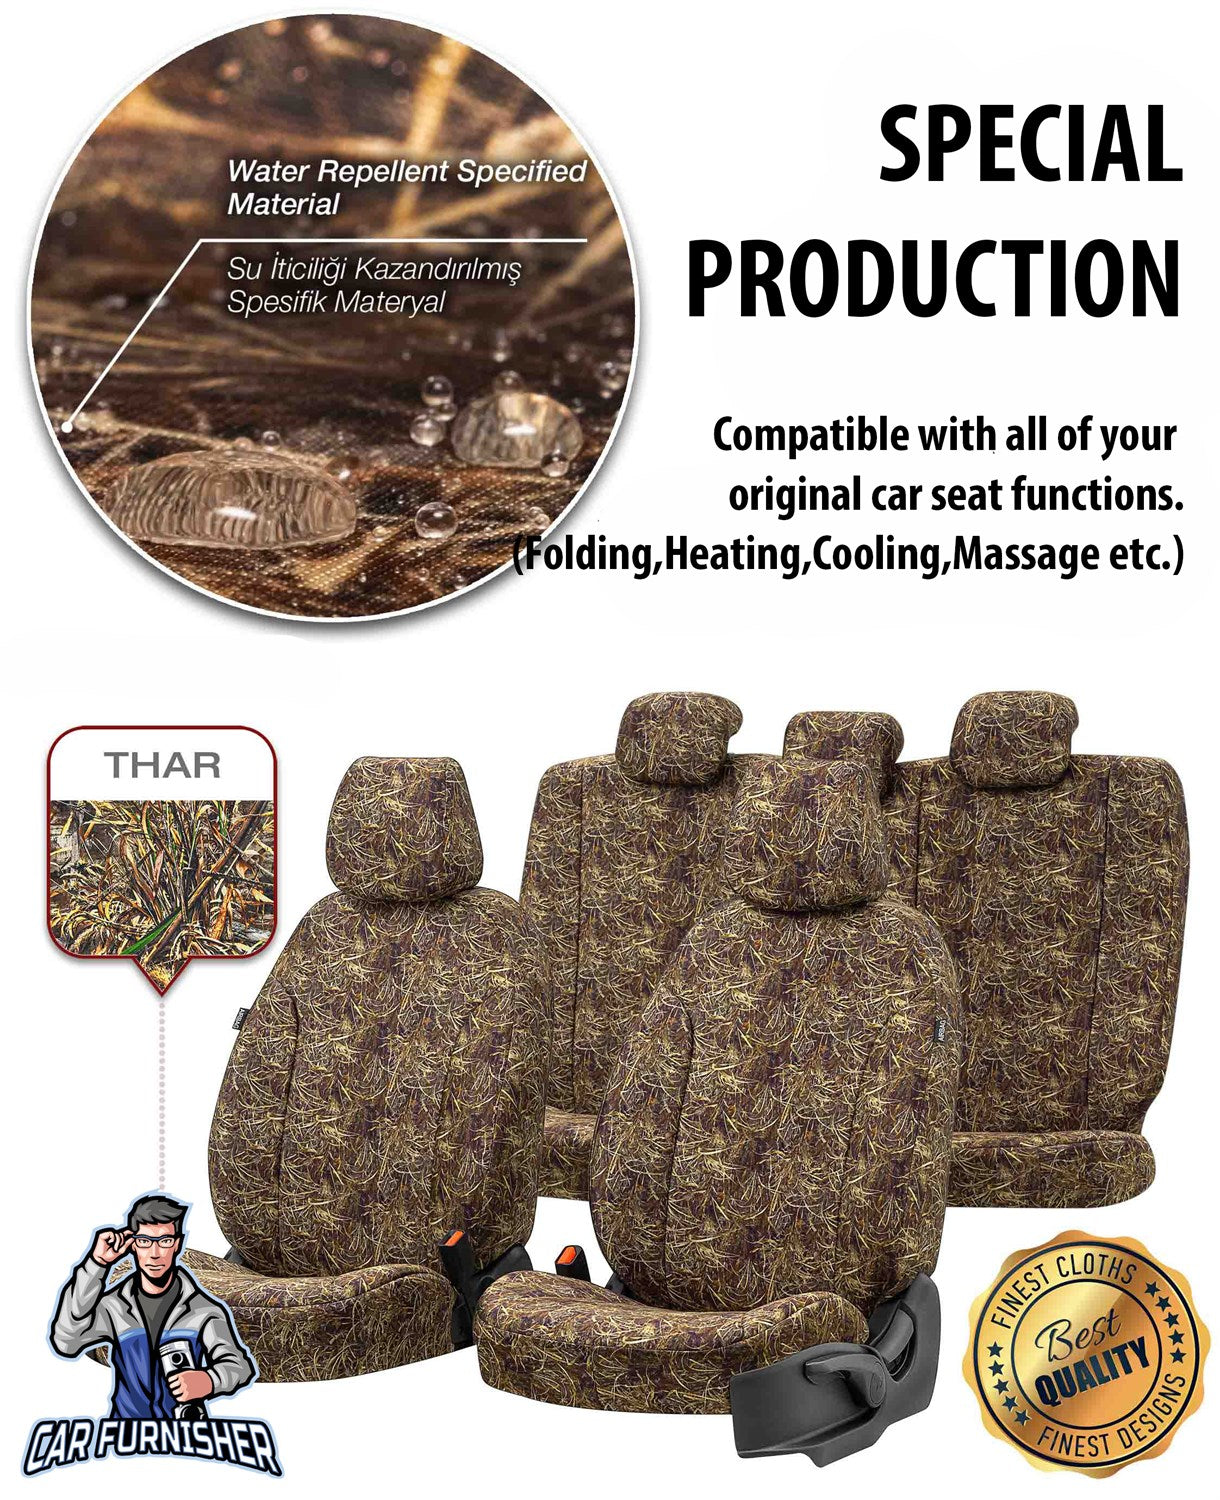 Fiat Freemont Seat Covers Camouflage Waterproof Design Thar Camo Waterproof Fabric